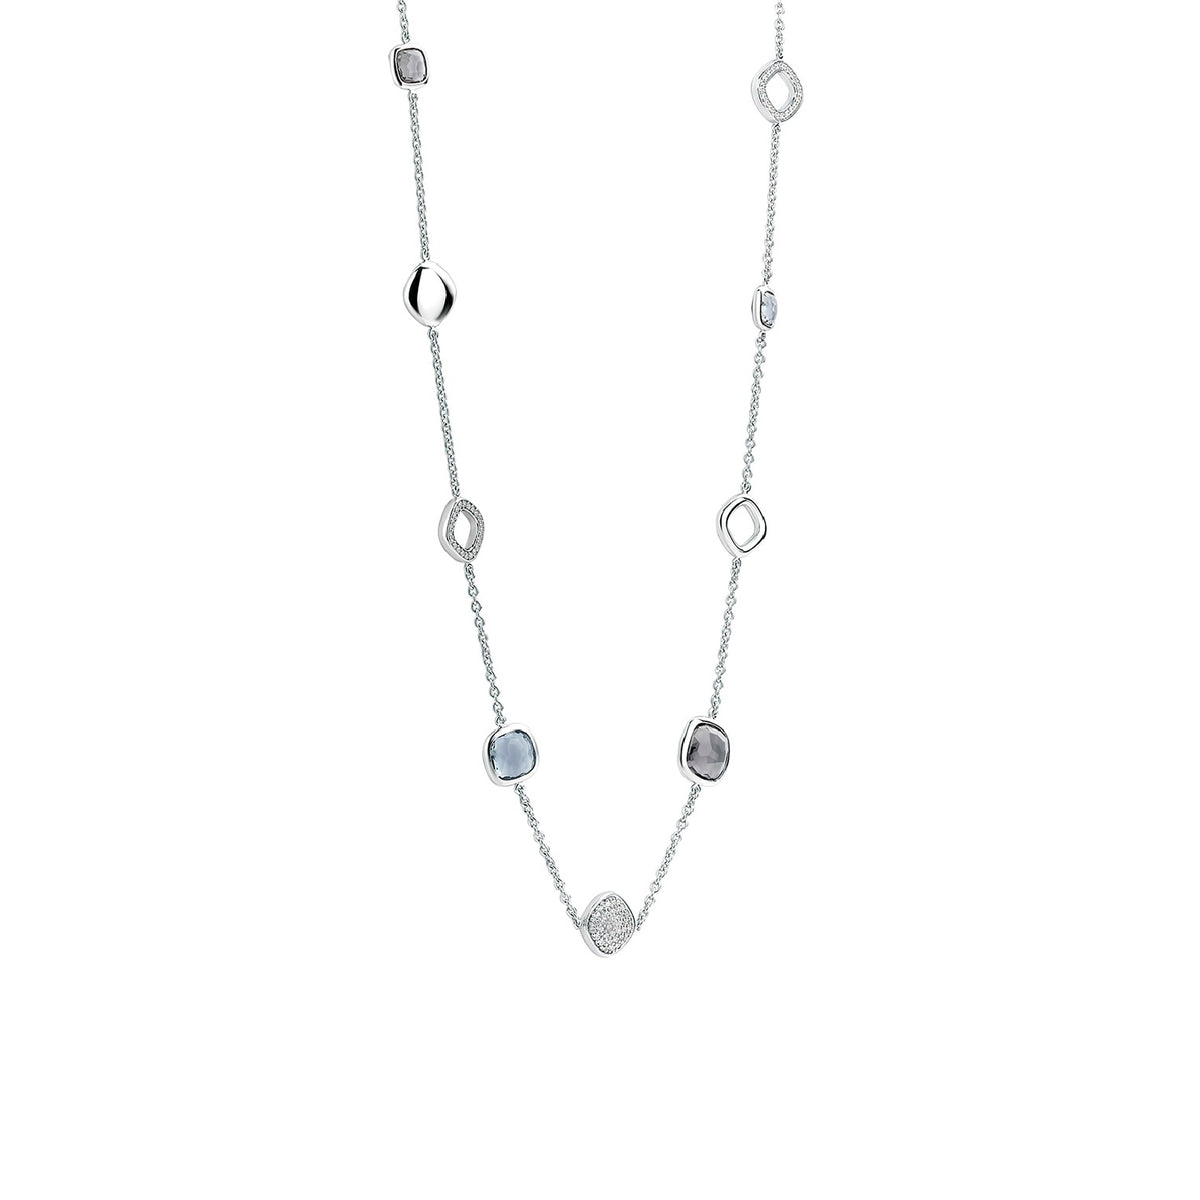 TI SENTO Sterling Silver Necklace with Multi-Stone Stations